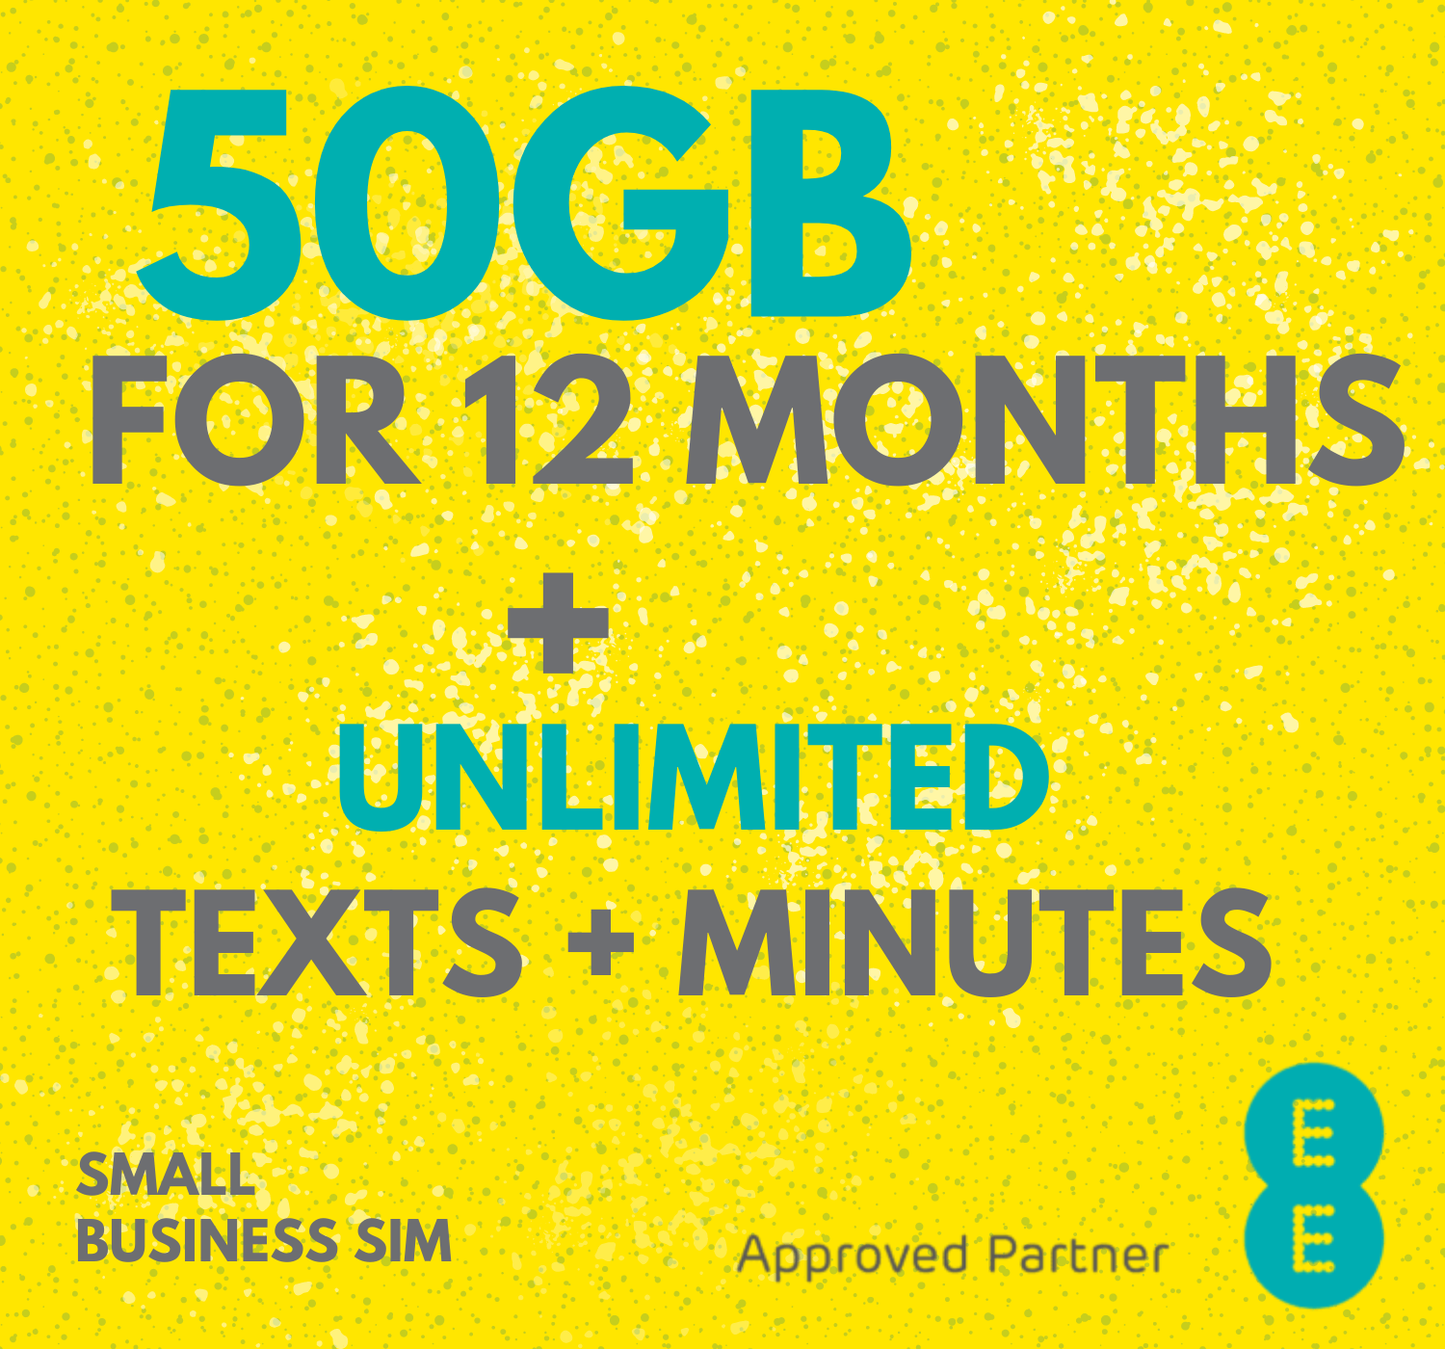 EE Business SIM £25pm Unlimited Data, Mins & Texts - 24 month